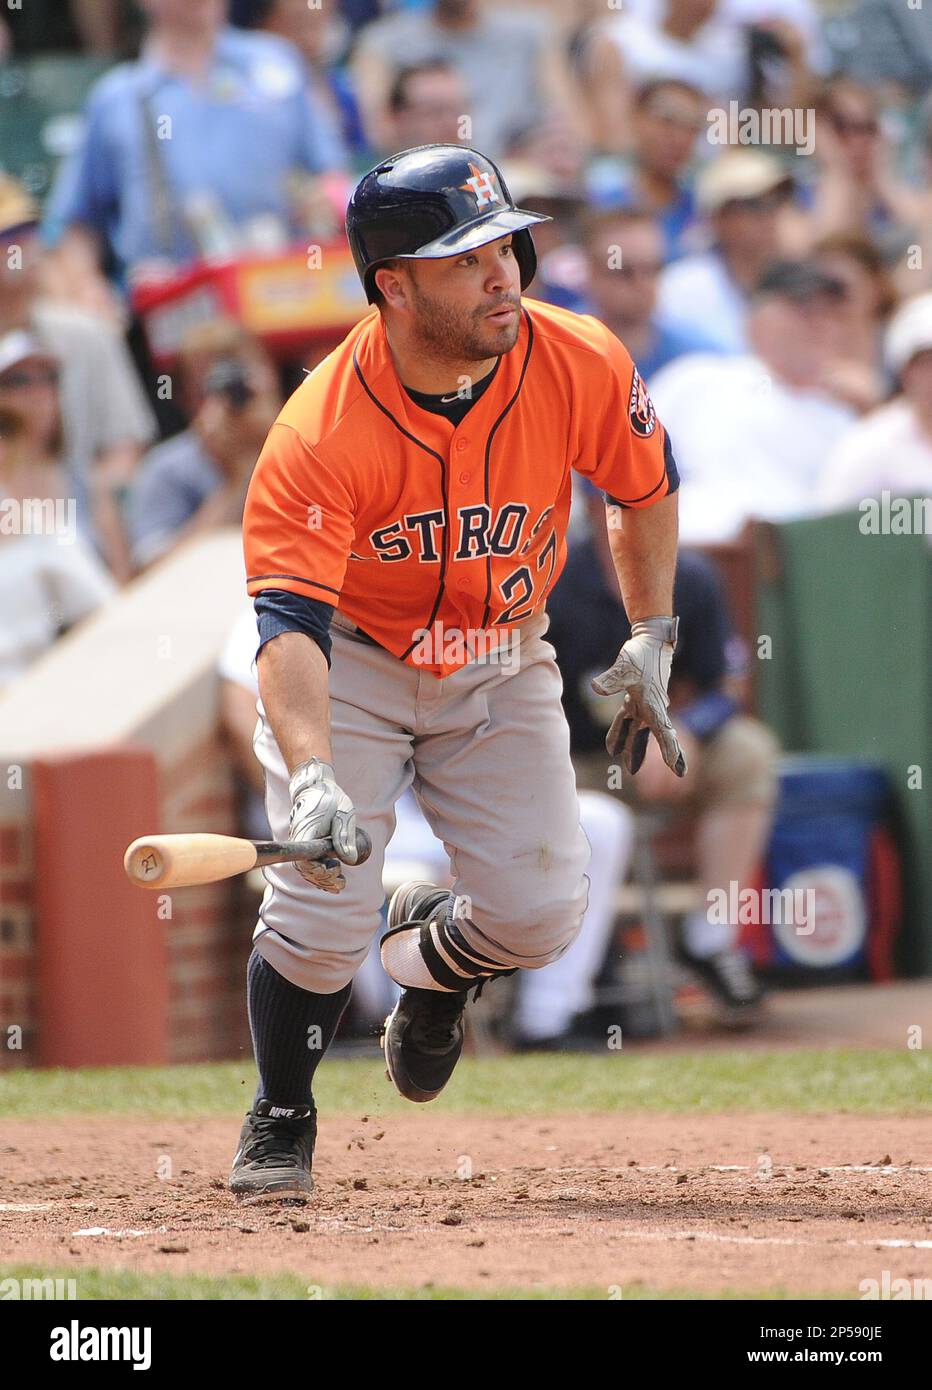 Houston Astros Jose Altuve (27) during a game against the Chicago Cubs on  June 23, 2013 at Wrigley Field in Chicago, IL. The Cubs beat the Astros  14-6.(AP Photo/David Durochik Stock Photo - Alamy